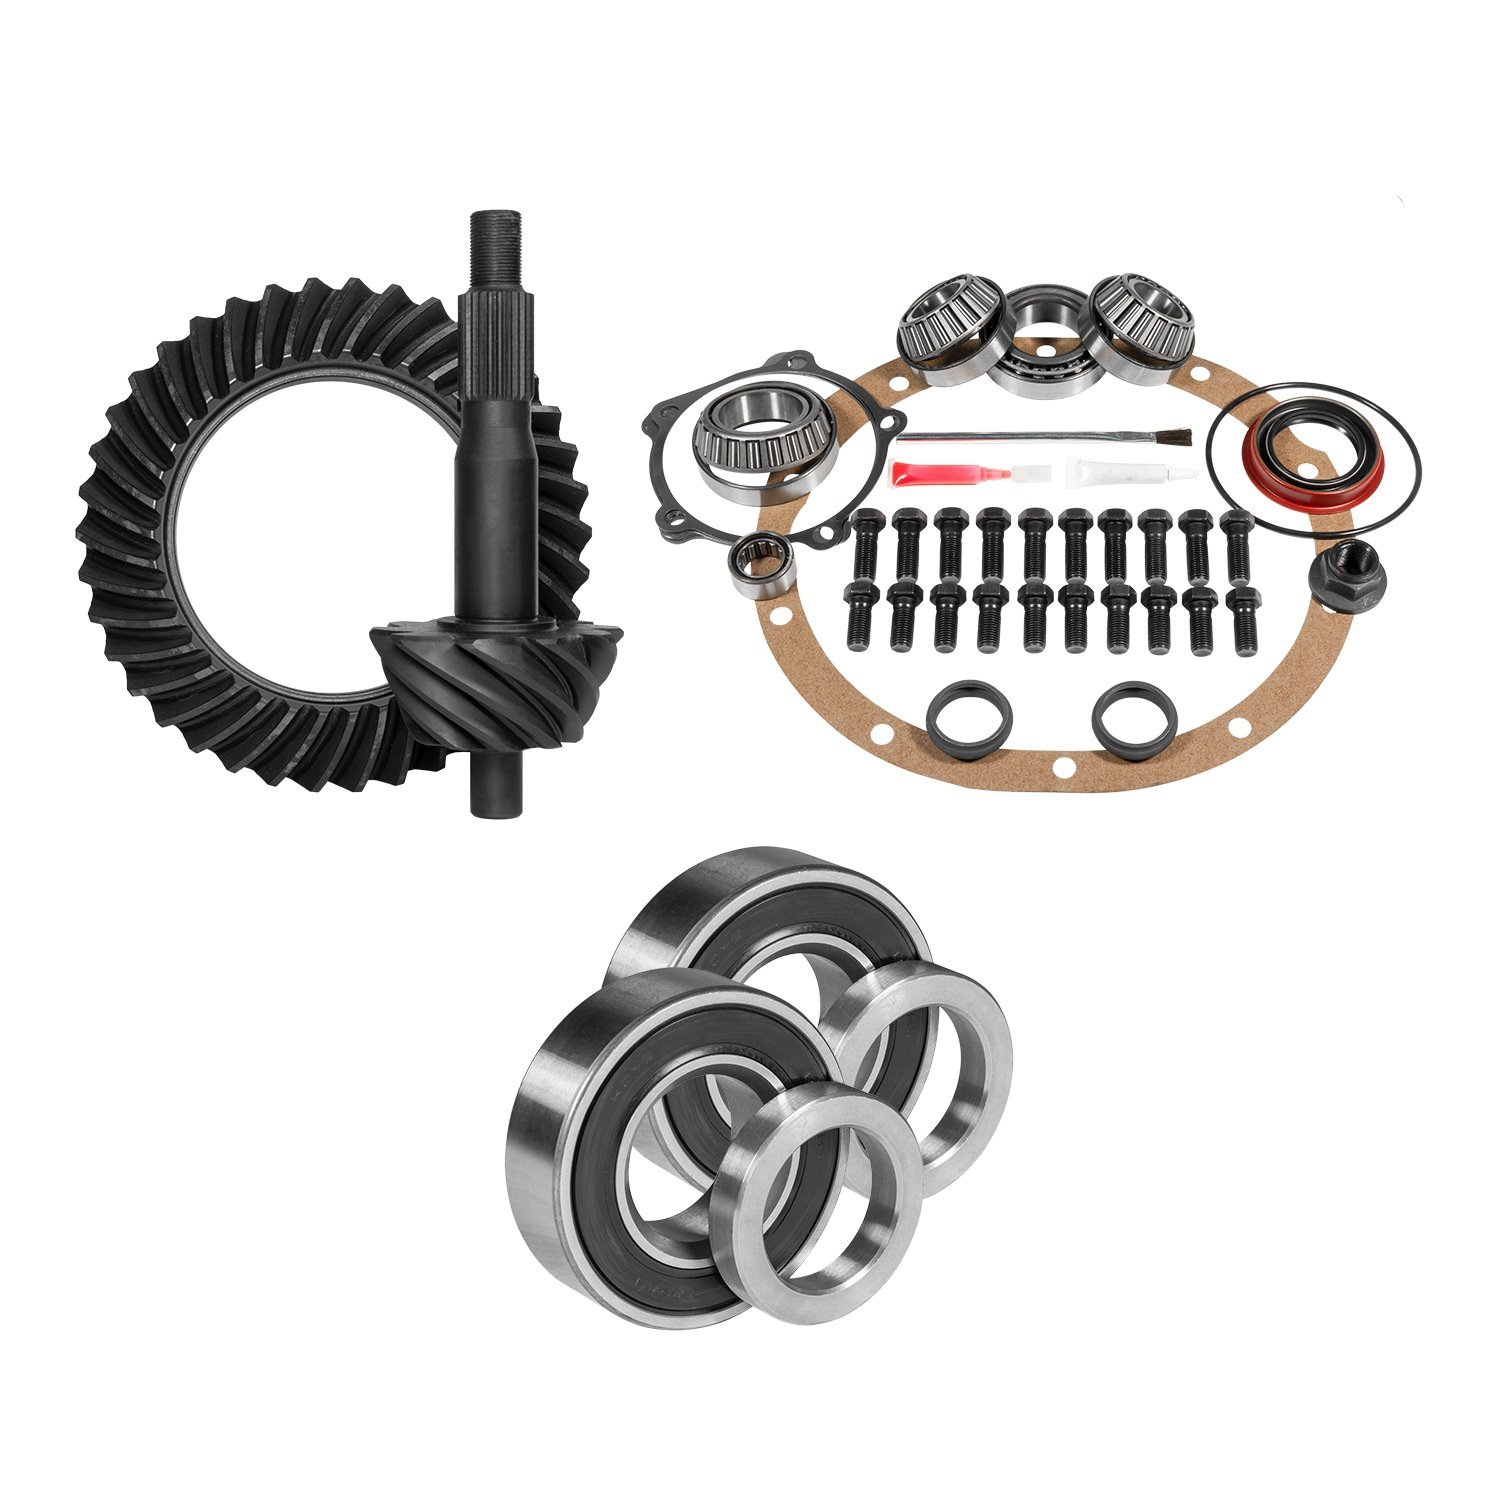 Muscle Car Re-Gear Kit For Ford 8 in. Differential, 25 Spline, 3.00 Ratio